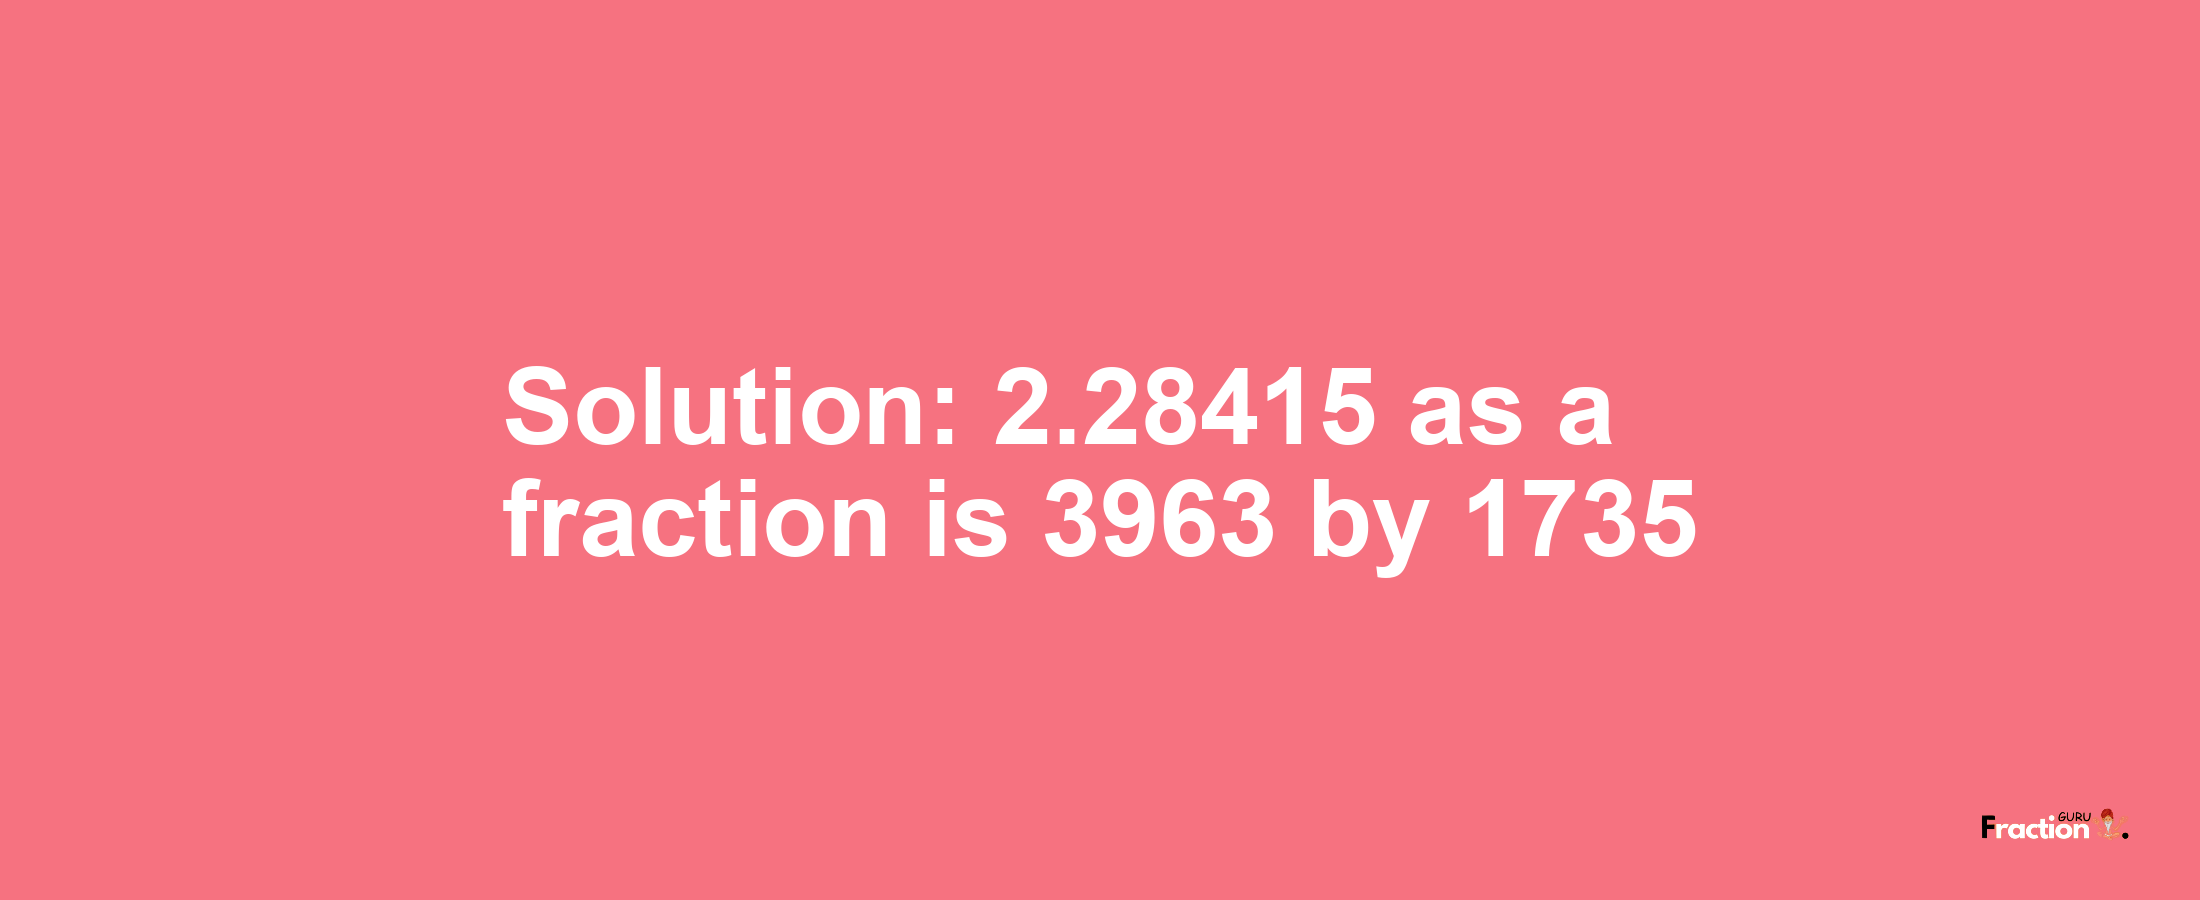 Solution:2.28415 as a fraction is 3963/1735